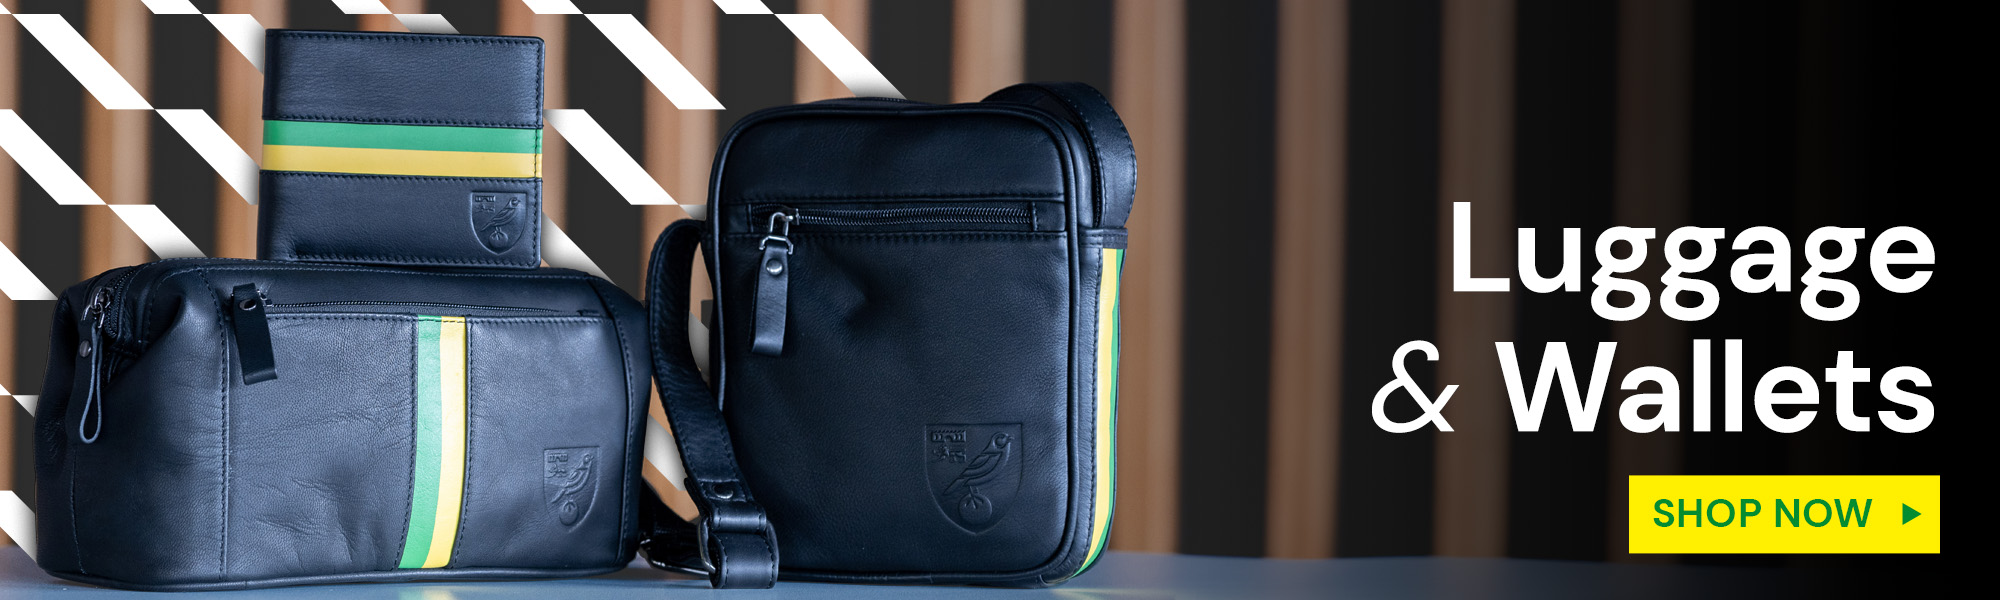 Luggage & Wallets | Shop Now